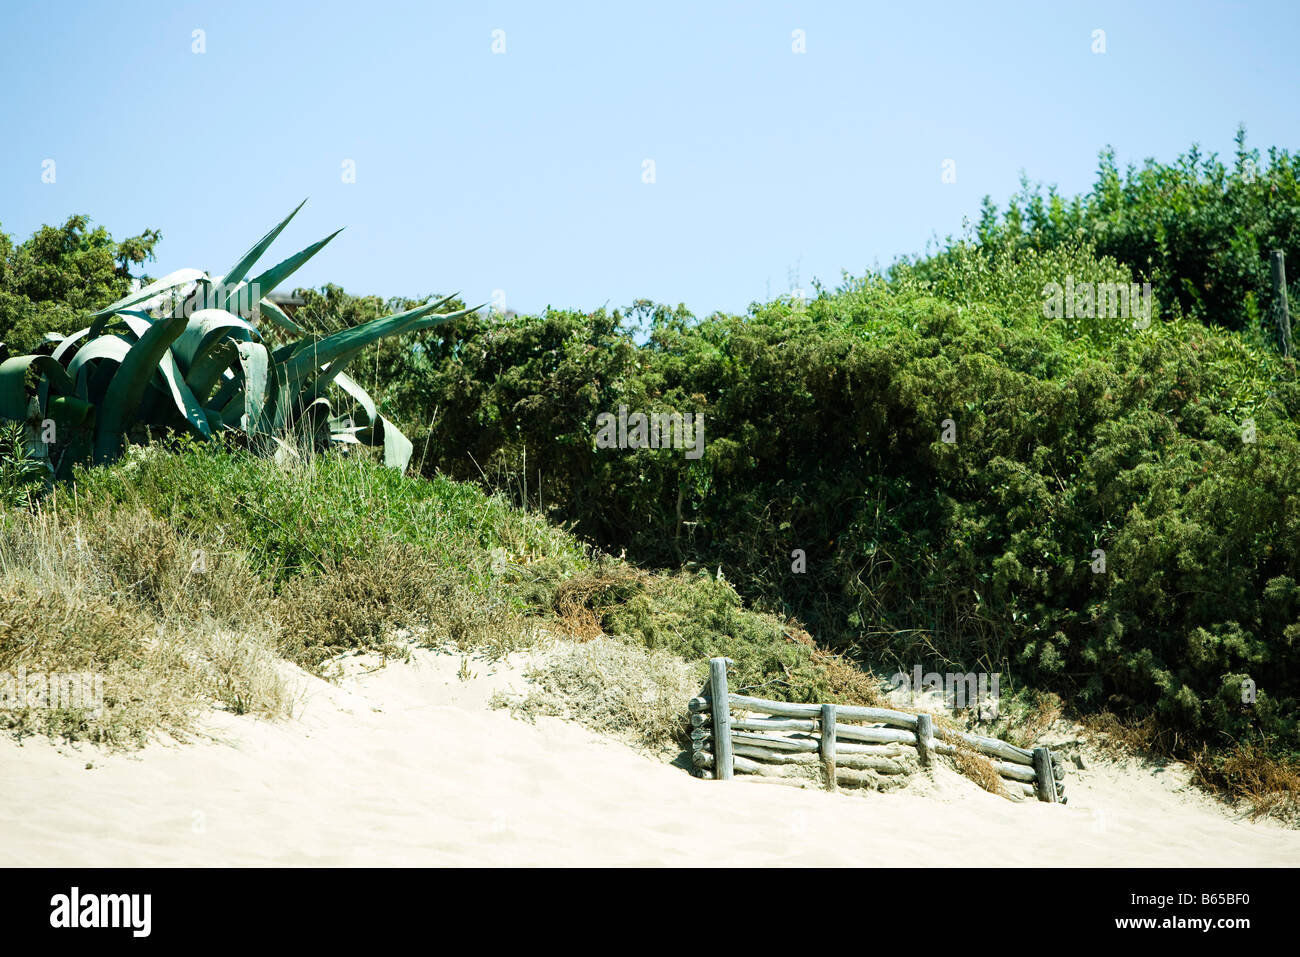 Sandy dune covered with vegetation, section of log fence at base of hill Stock Photo